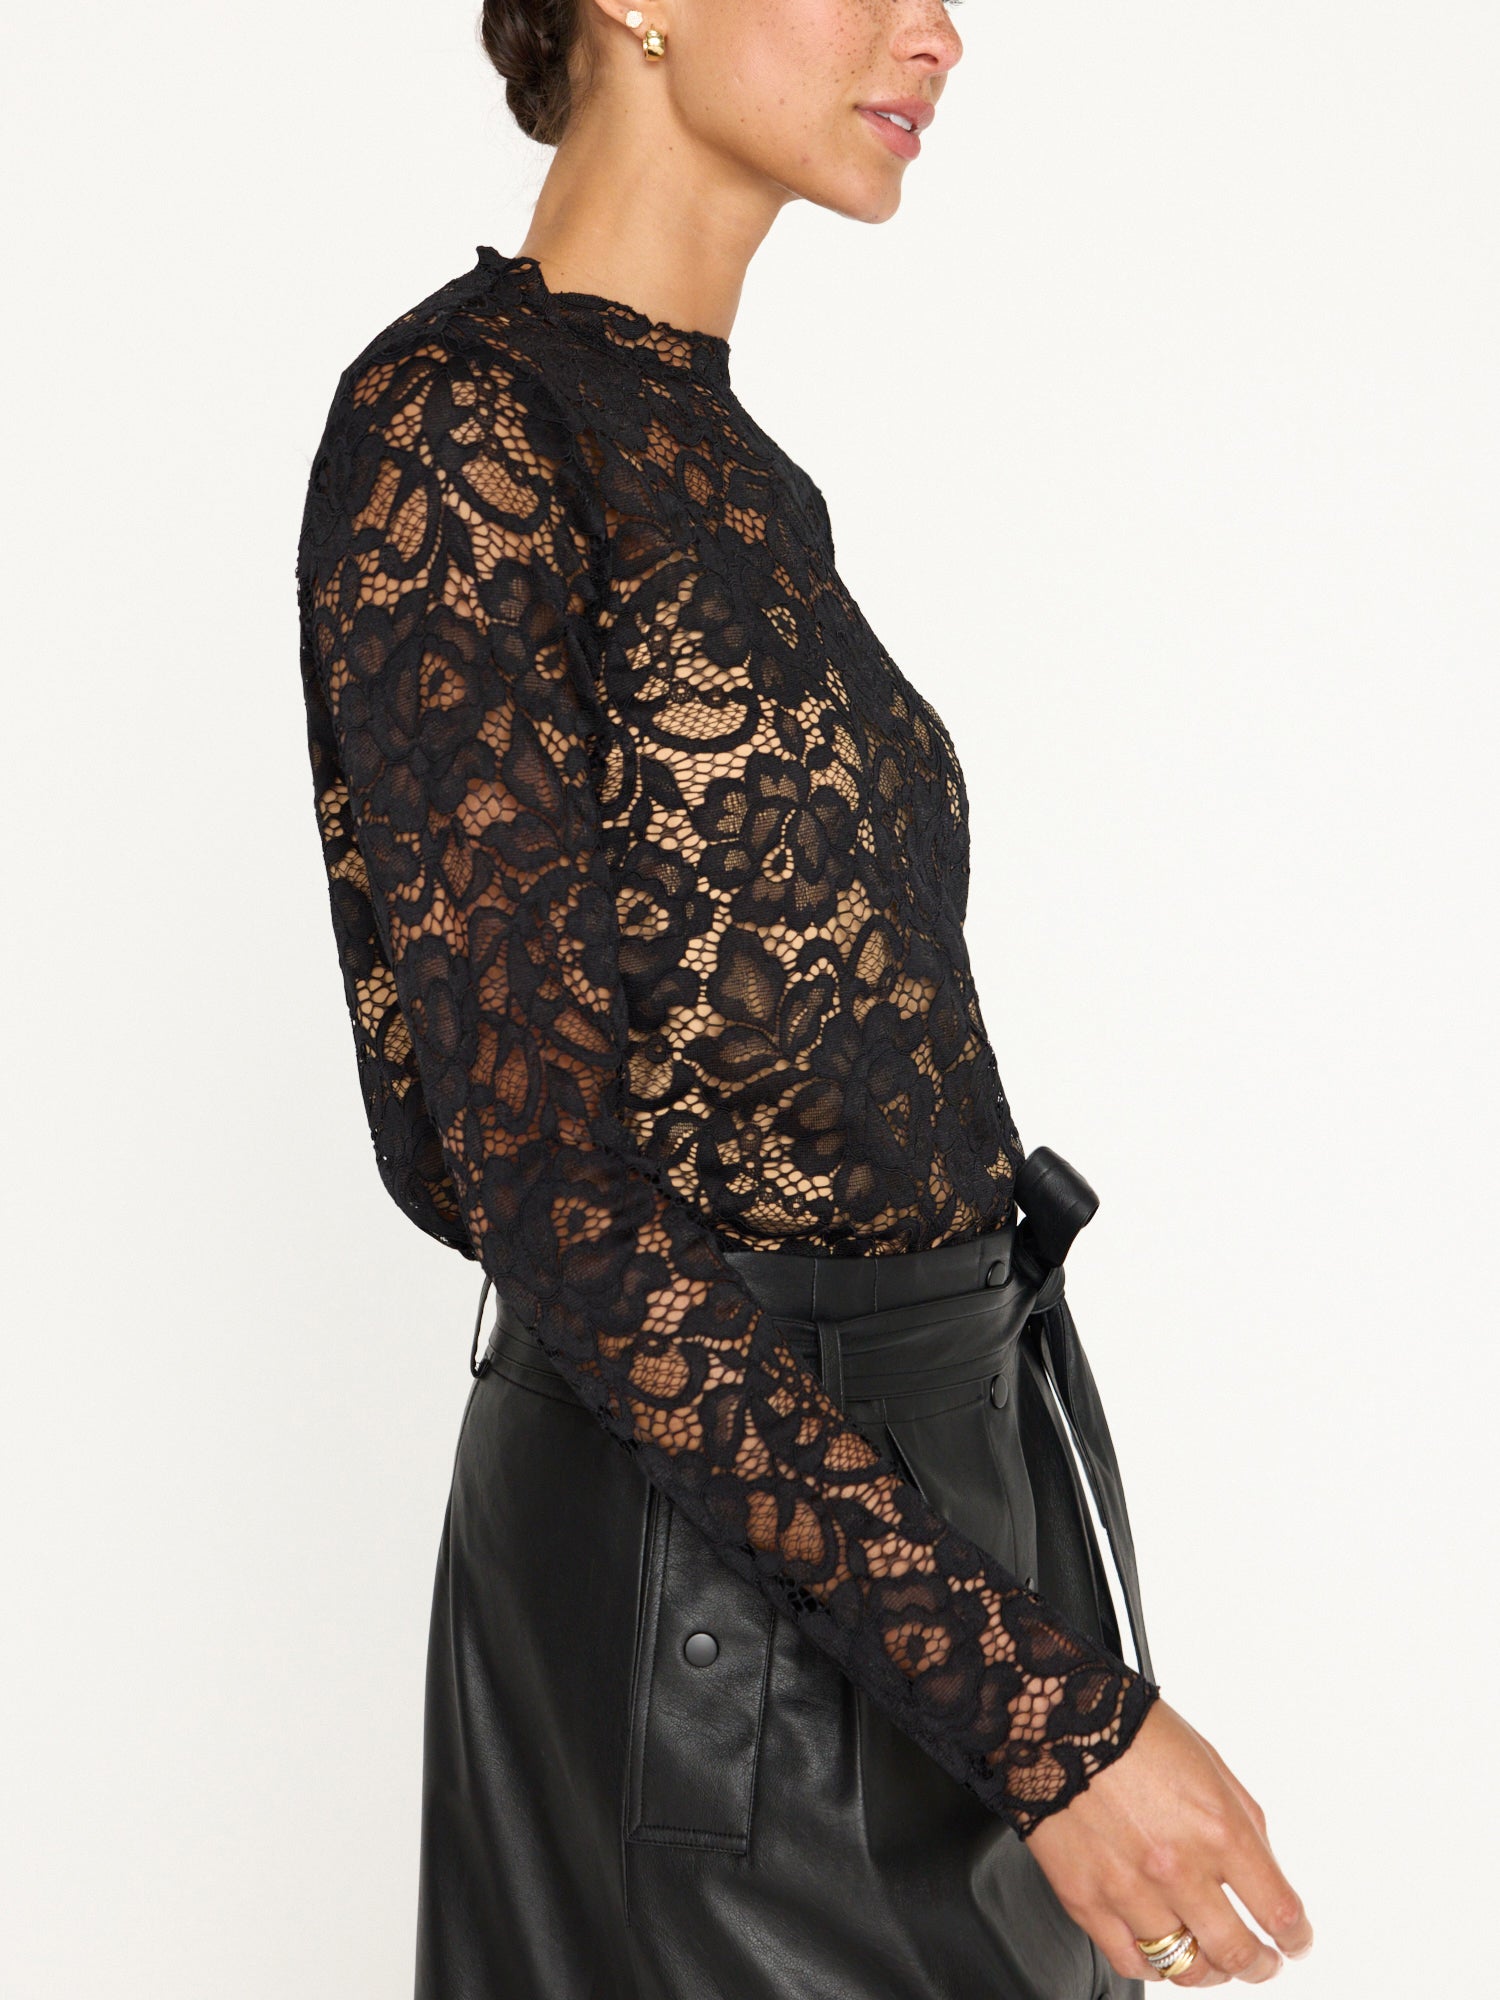 Donne black lace long sleeve top side view